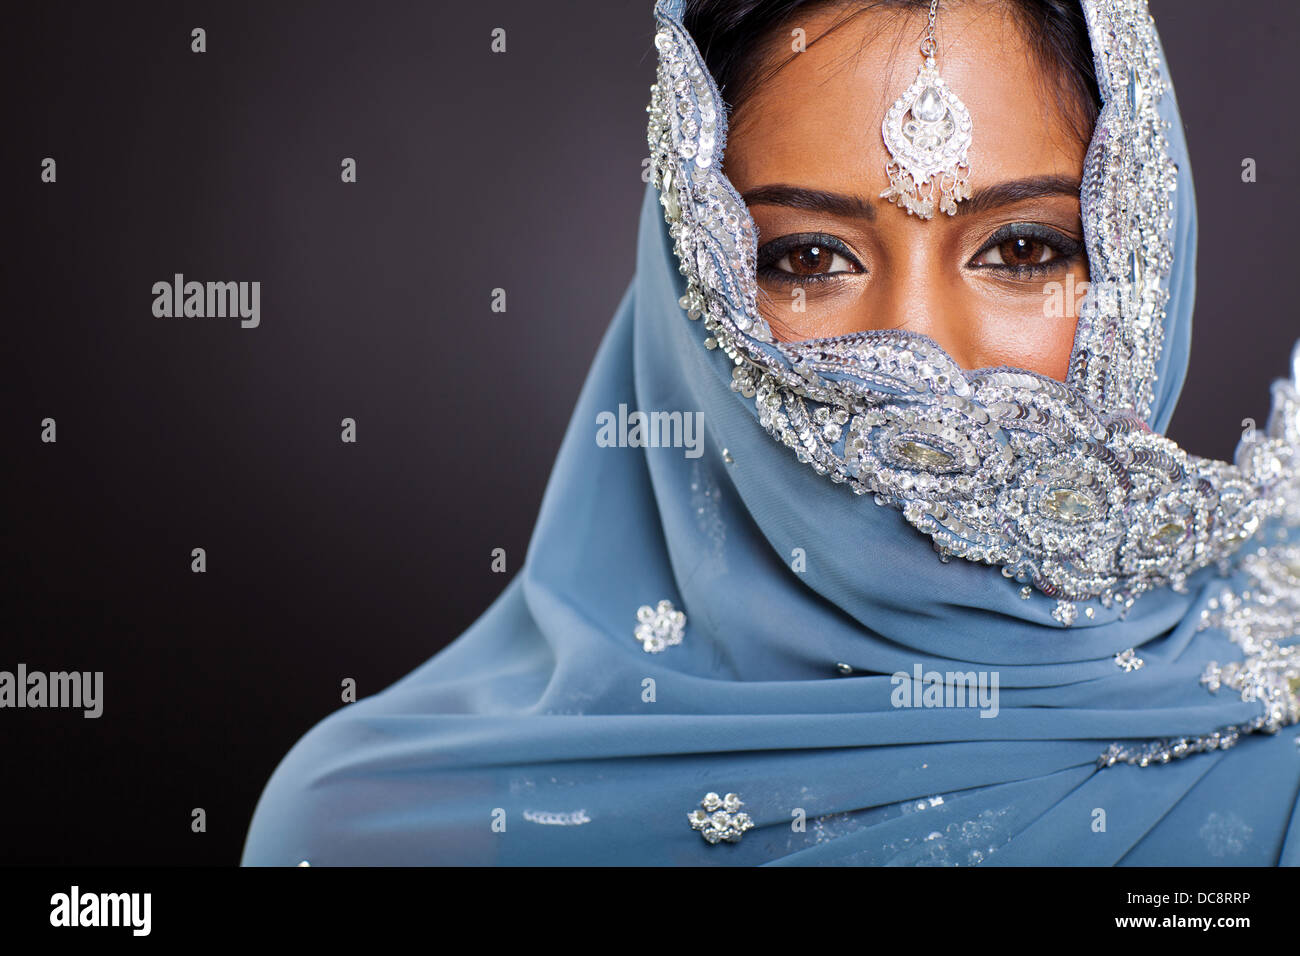 young Indian woman in sari with her face covered on black background Stock Photo